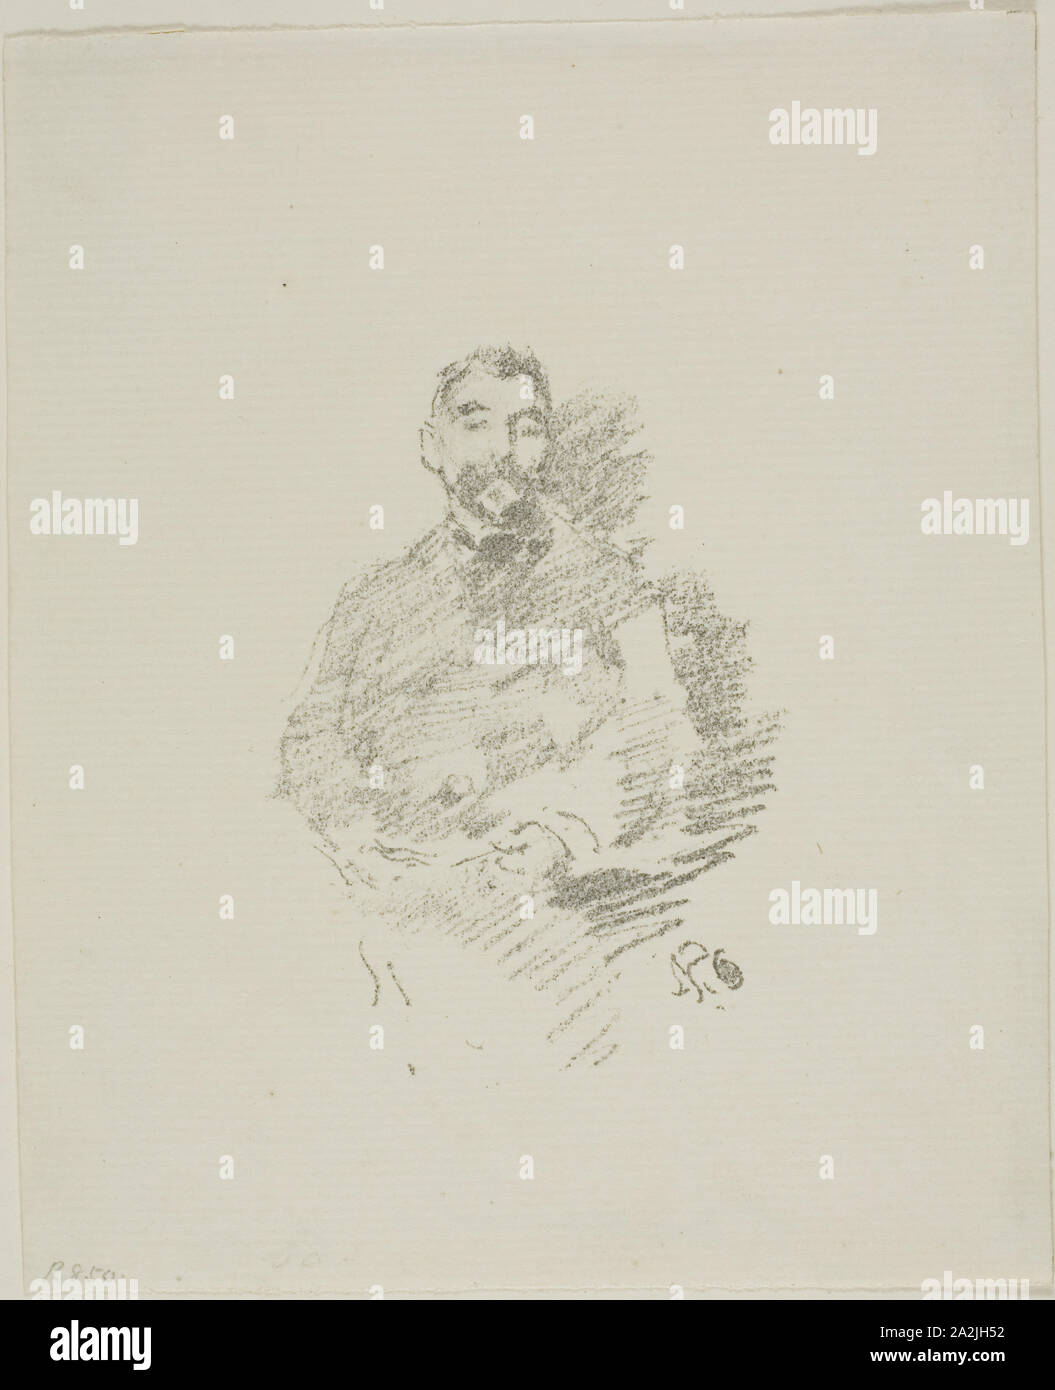 Stéphane Mallarmé, 1892, James McNeill Whistler, American, 1834-1903, United States, Transfer lithograph in gray-black on ivory laid paper, 97 x 70 mm (image), 169 x 137 mm (sheet Stock Photo